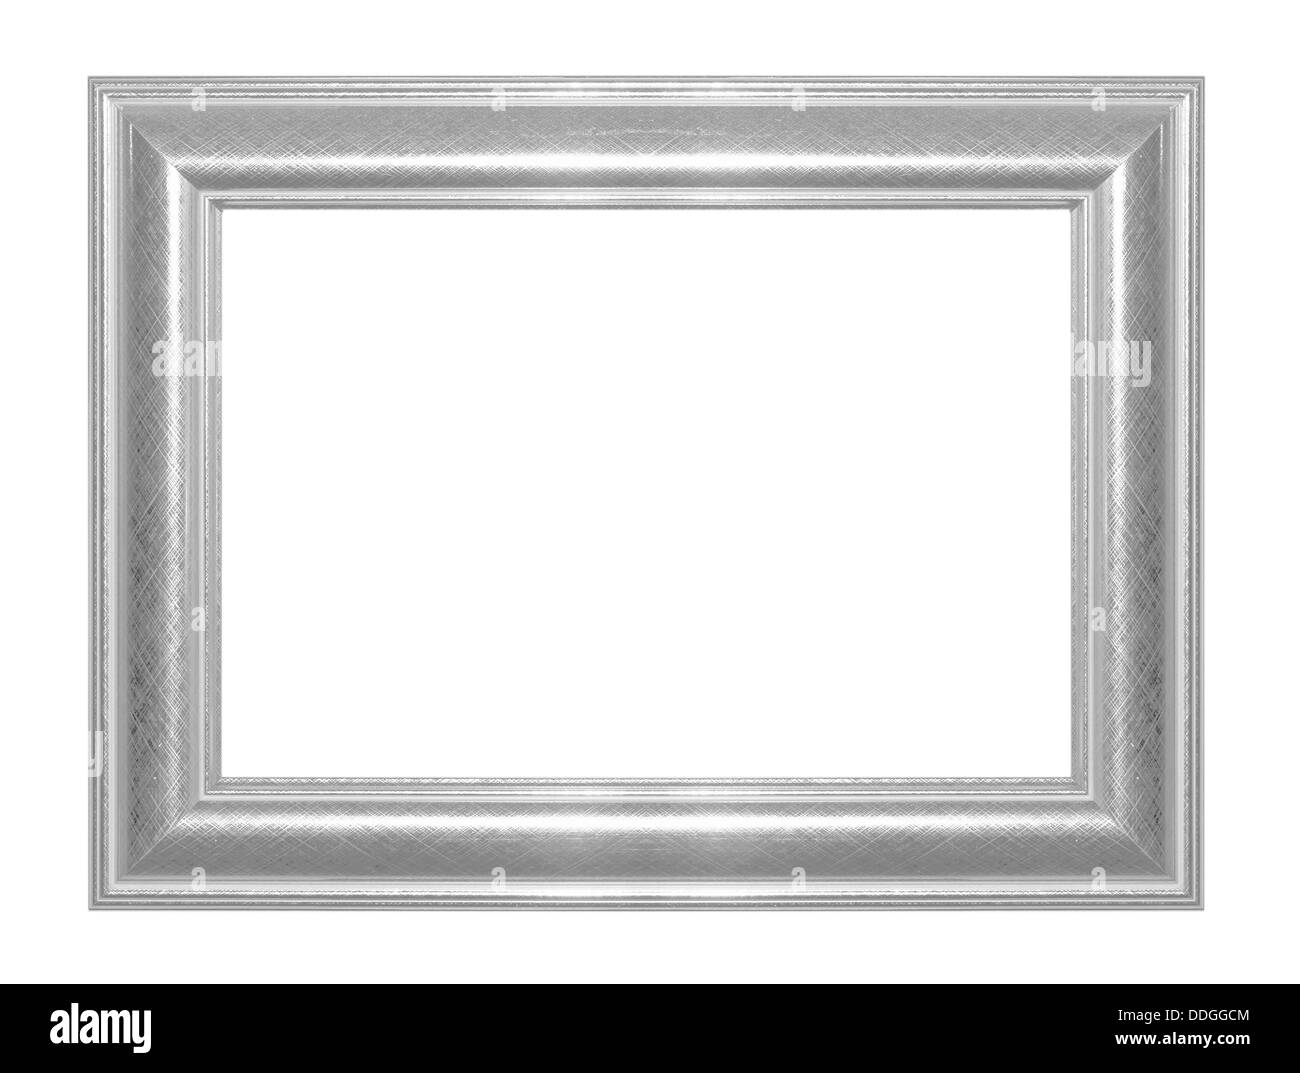 Old Antique frame Isolated Decorative Carved Wood Stand Antique Frame Isolated On White Background Stock Photo